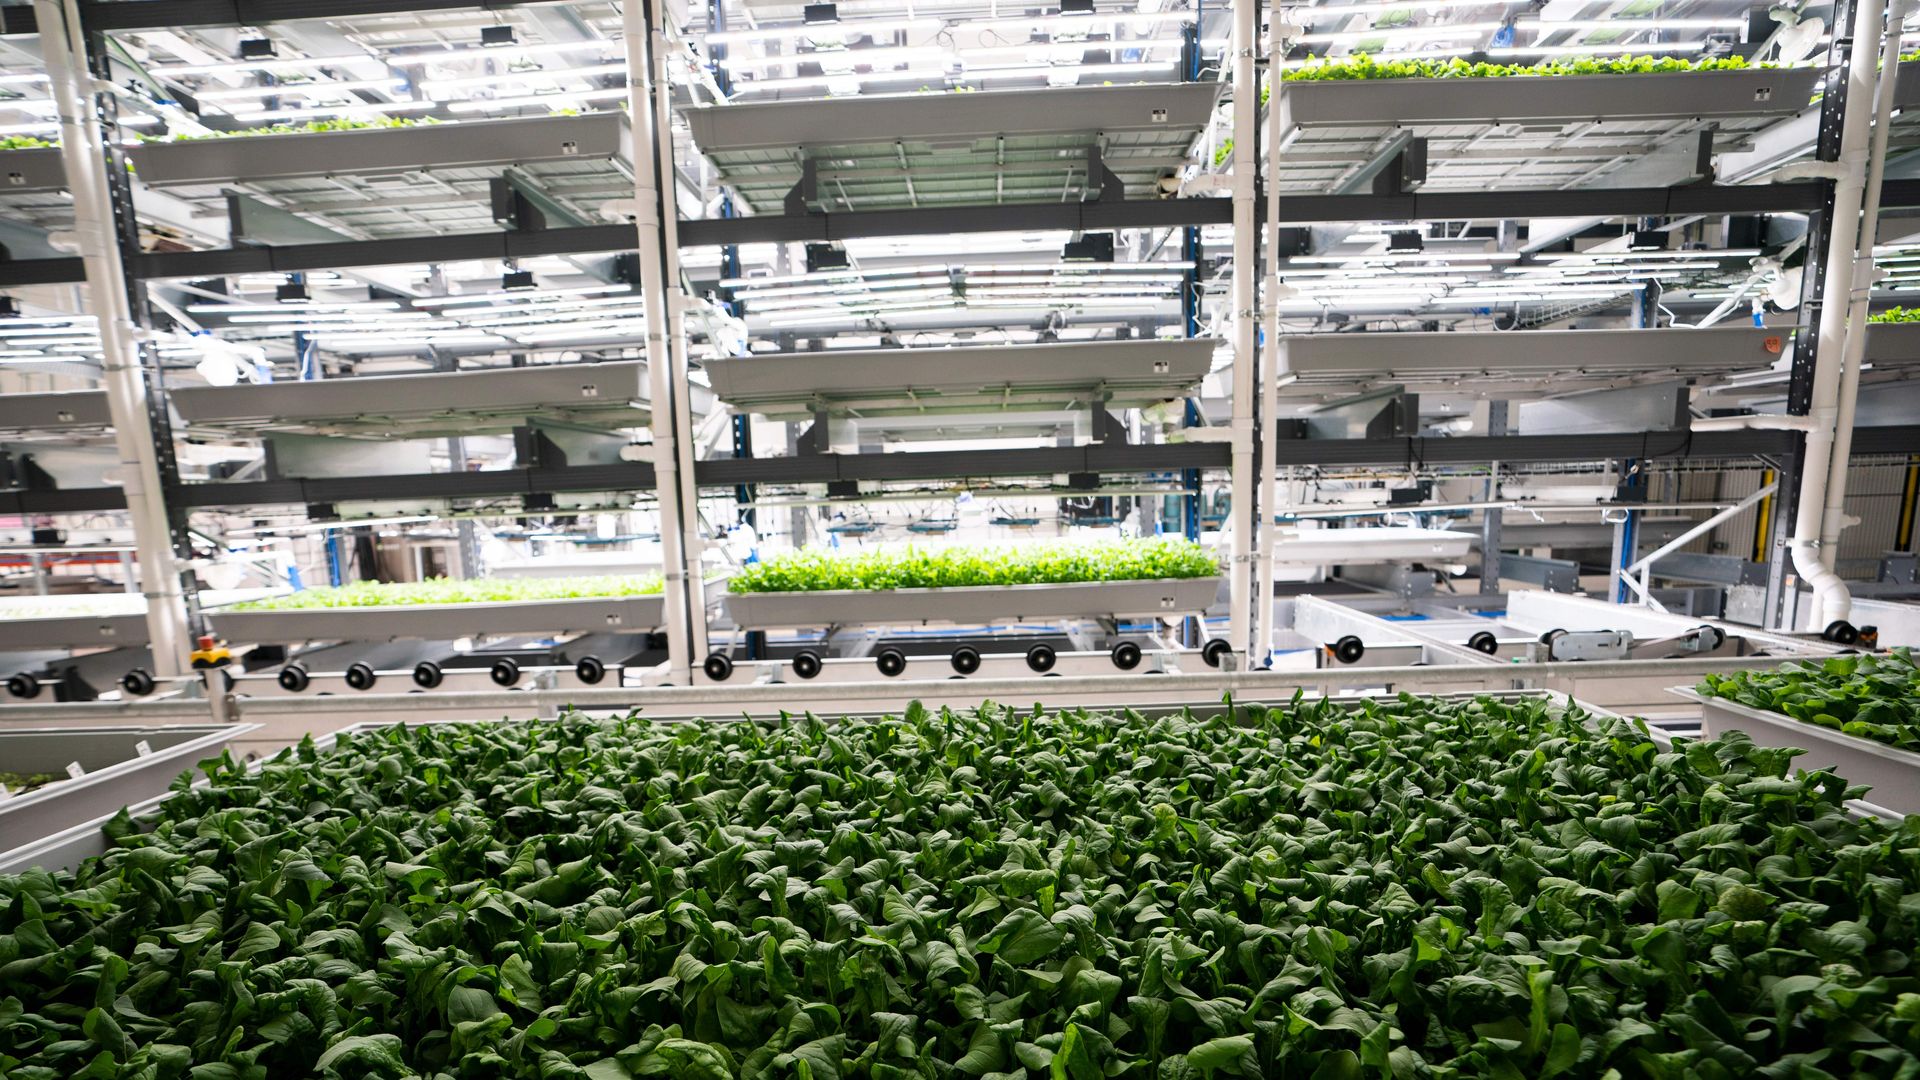 Greens are grown at Bowery Farming, a vertical farm in Kearny, New Jersey.